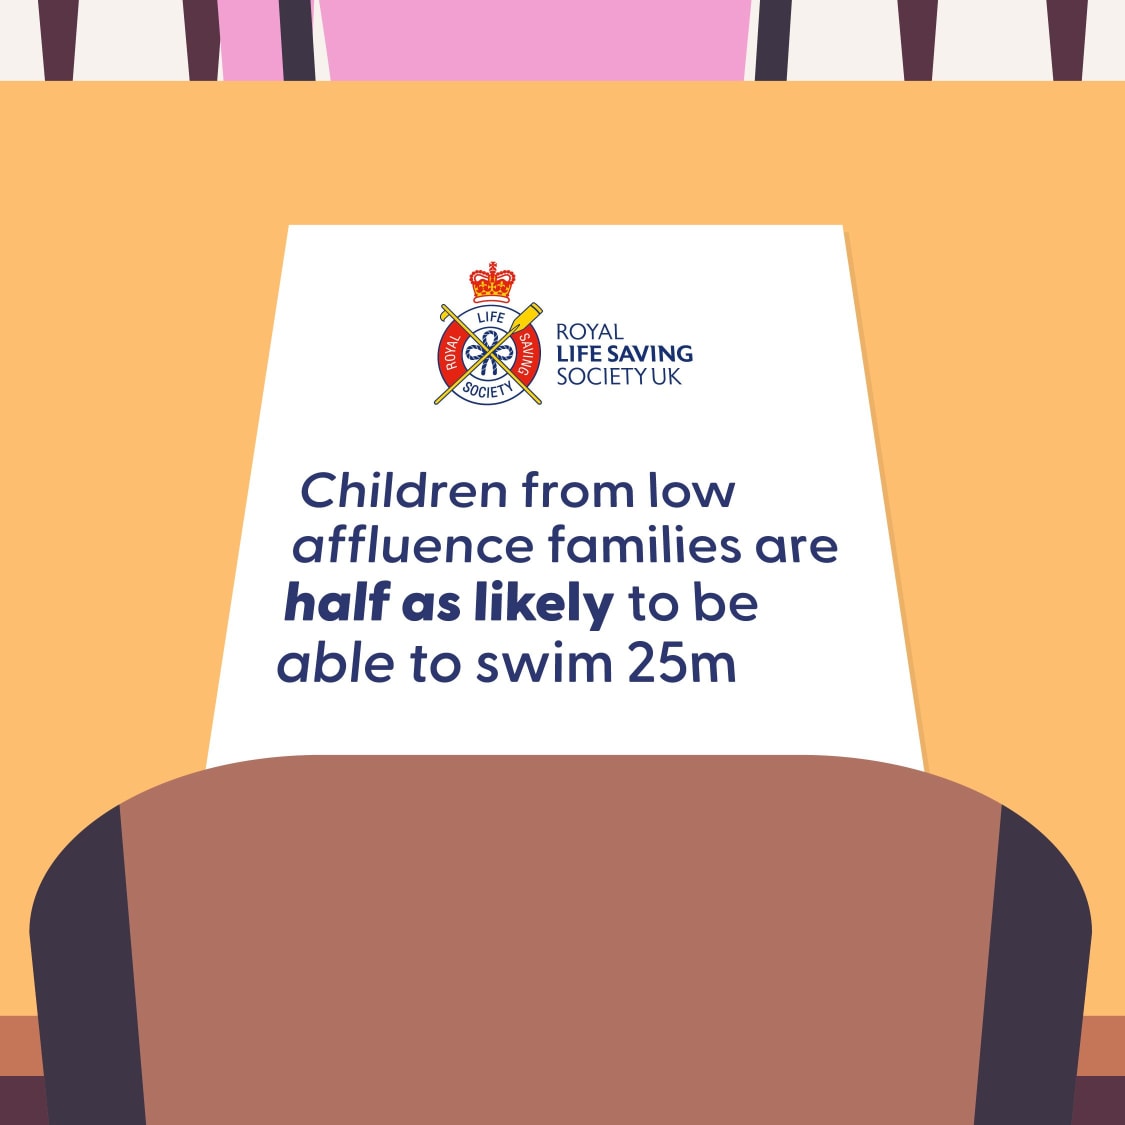 Children from low affluence backgrounds are half as likely to be able to swim 25m